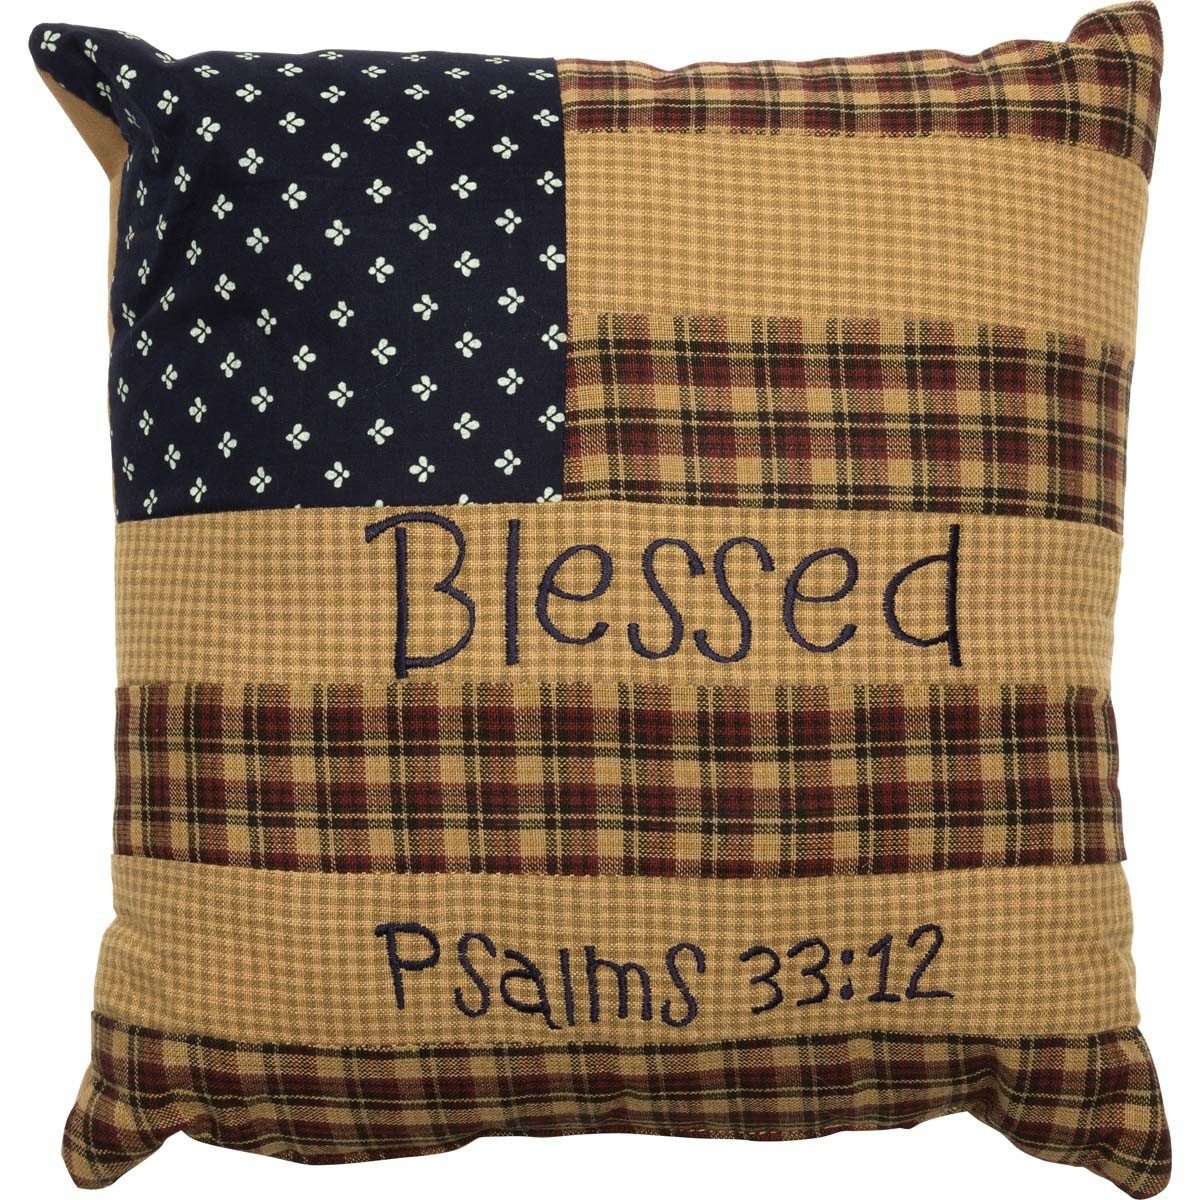 Patriotic Patch Pillow Blessed 10"x10" Deep Red, Khaki, Navy VHC Brands - The Fox Decor